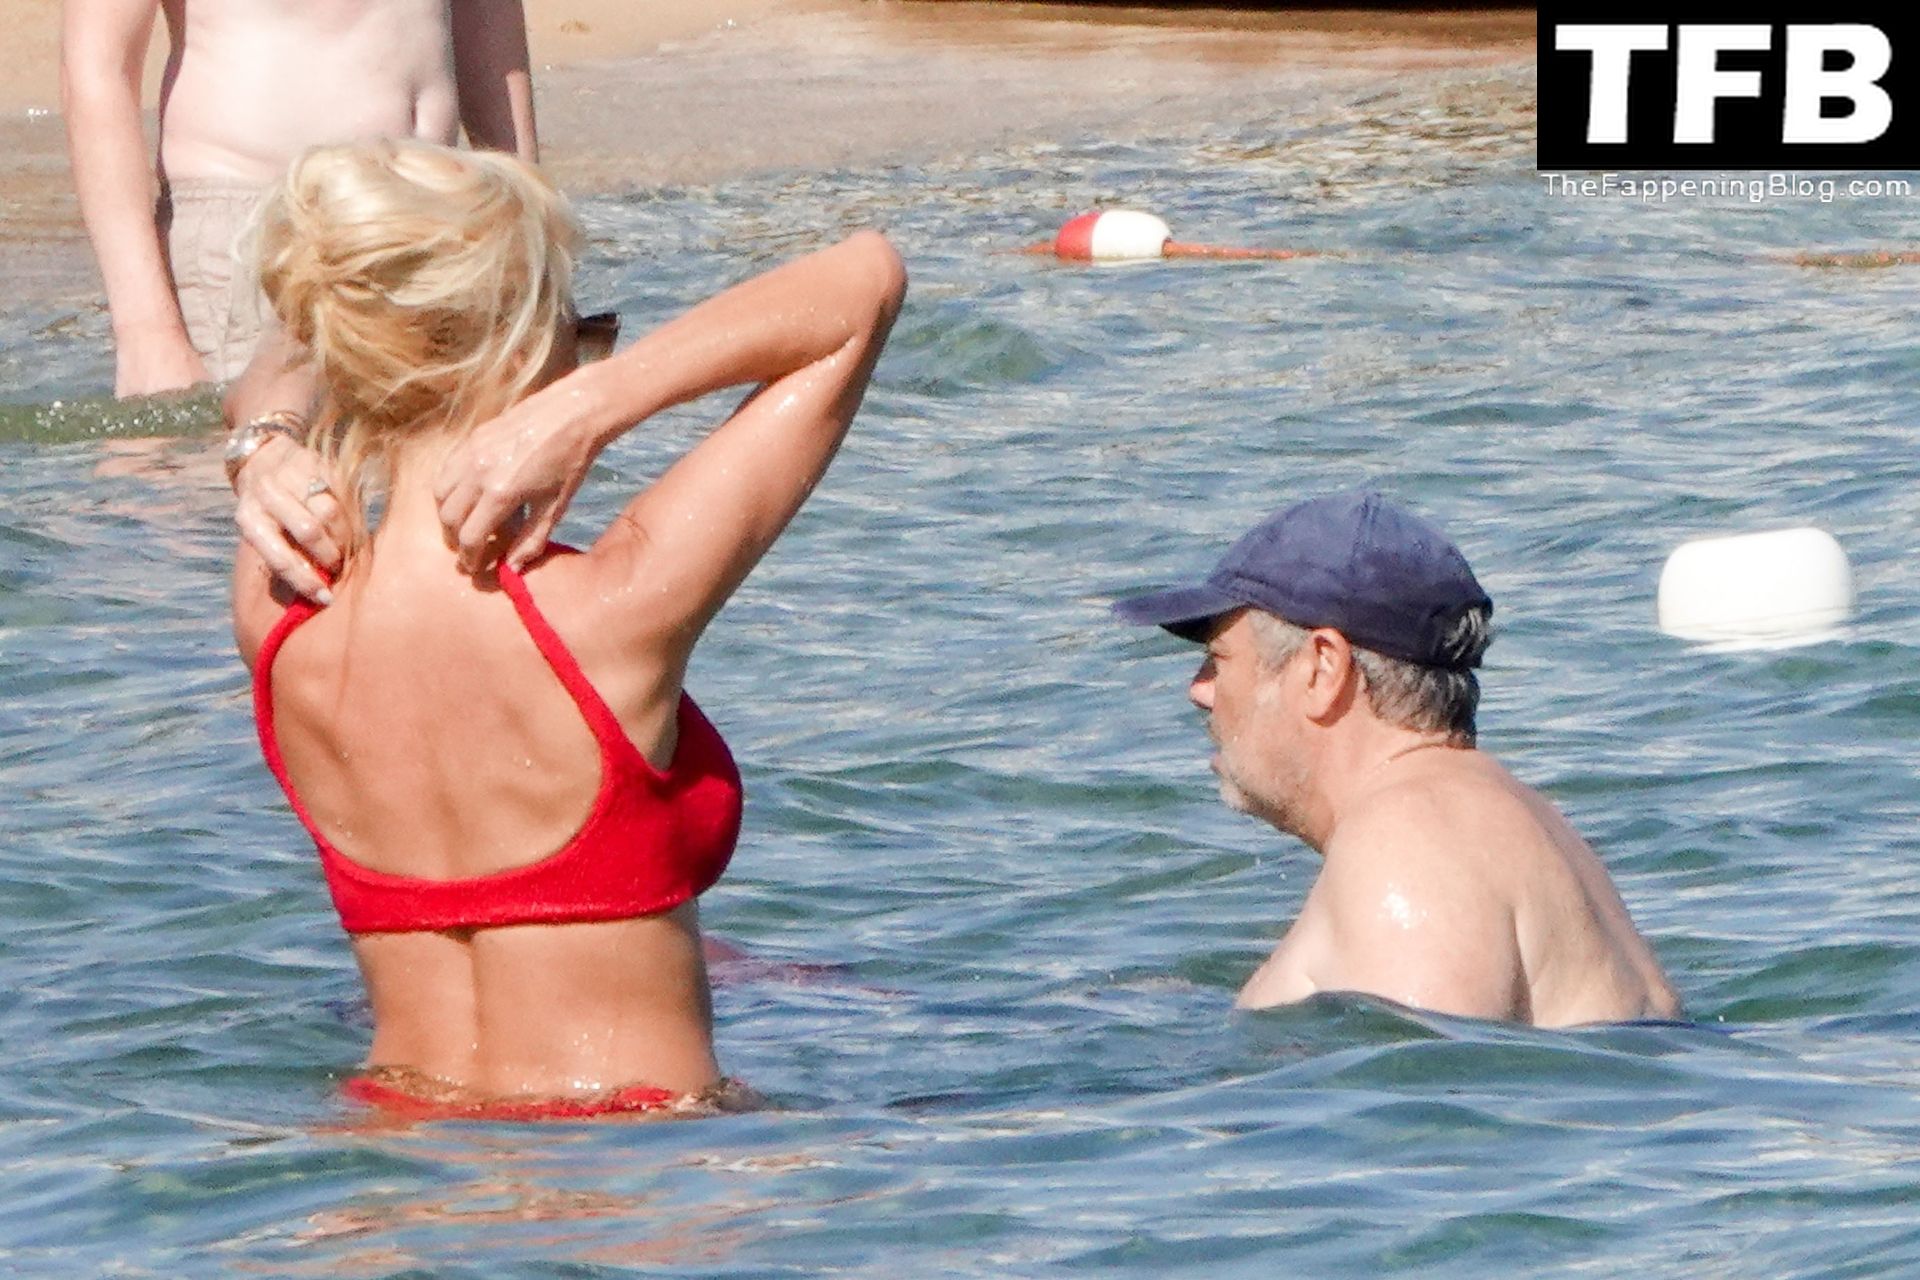 Victoria Silvstedt Showcases Her Sexy Figure in a Skimpy Red Bikini (62 Photos)